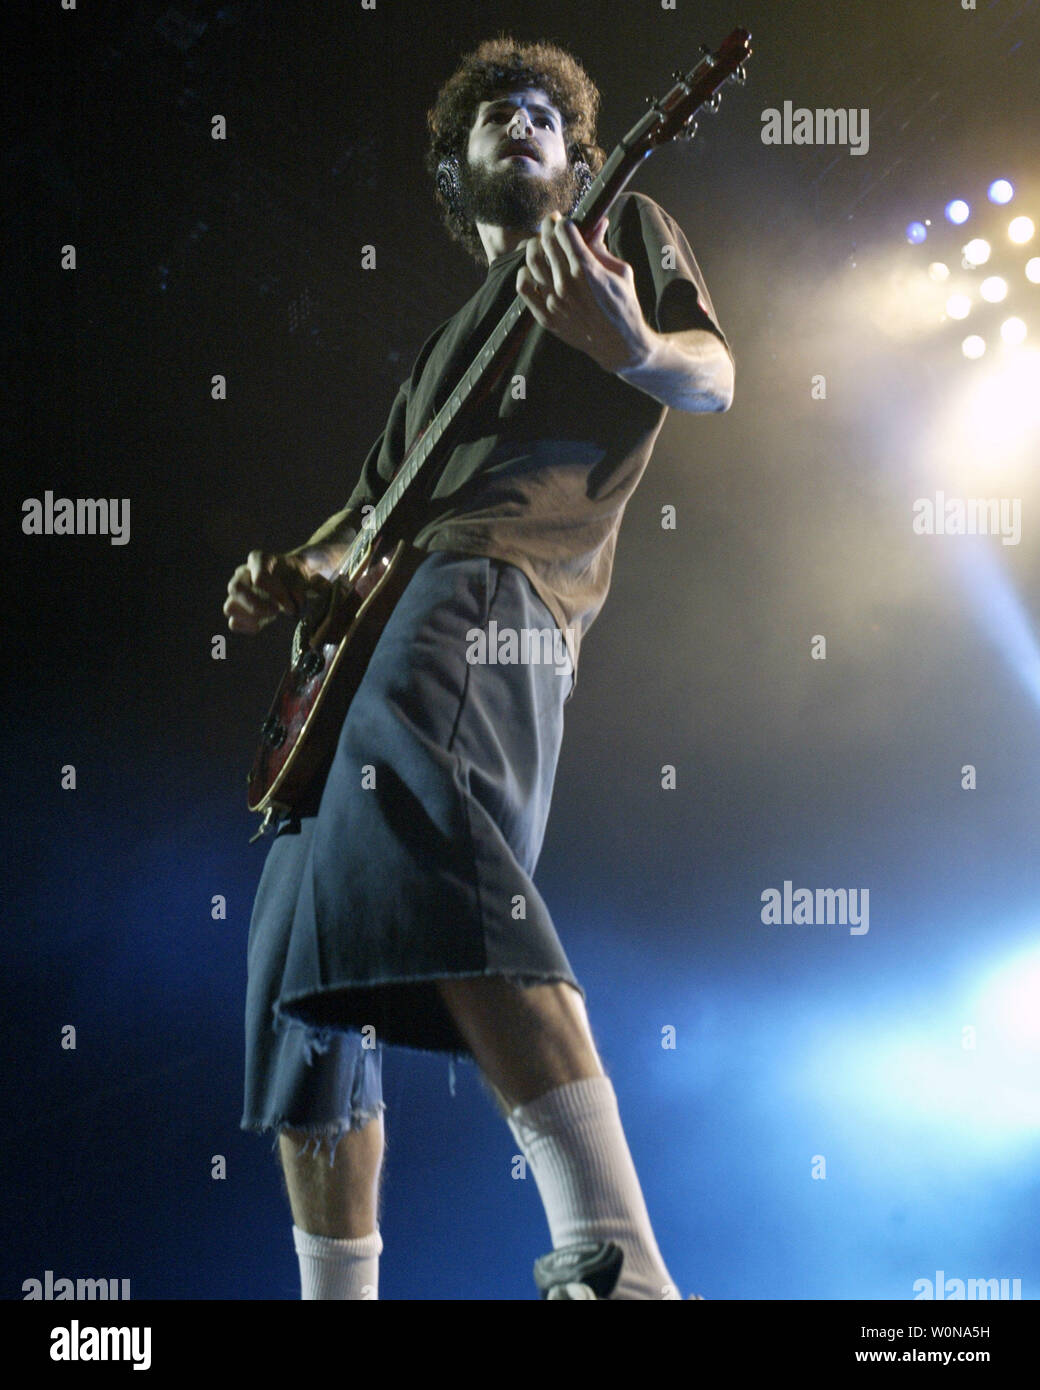 Brad Delson of Linkin Park,  performs in concert during the Projekt Revolution 2004 Tour, at the Sound Advice Amphitheatre , in West Palm Beach,  Florida, on August 17, 2004.  (UPI Photo/Michael Bush) Stock Photo